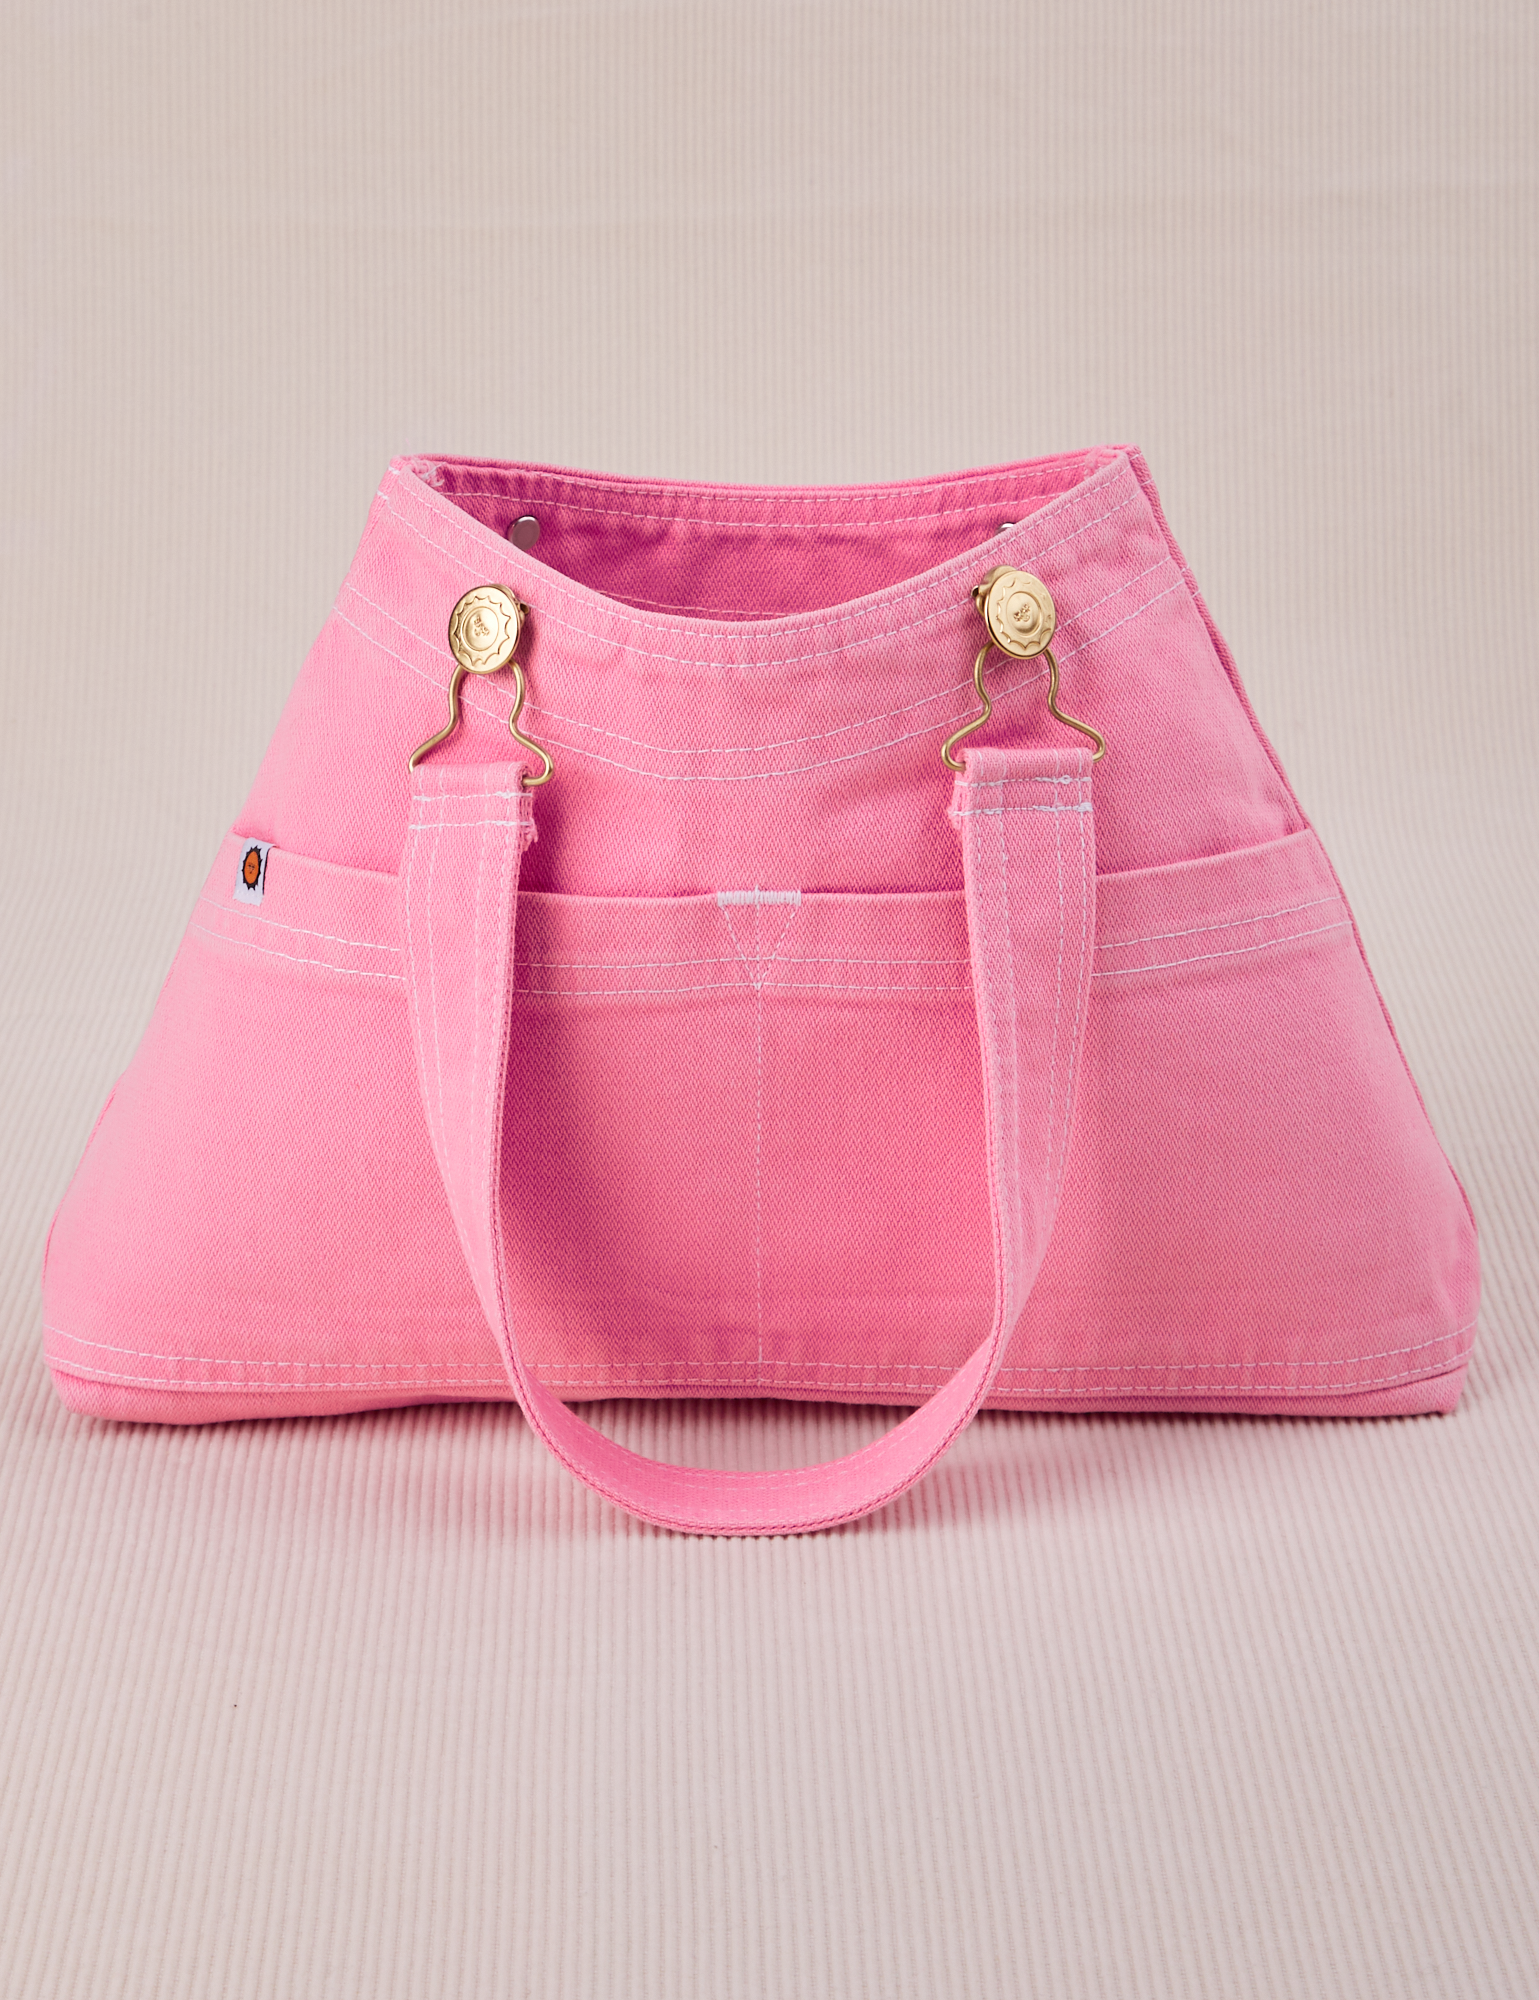 Overall Handbag in Bubblegum Pink with strap laying across front